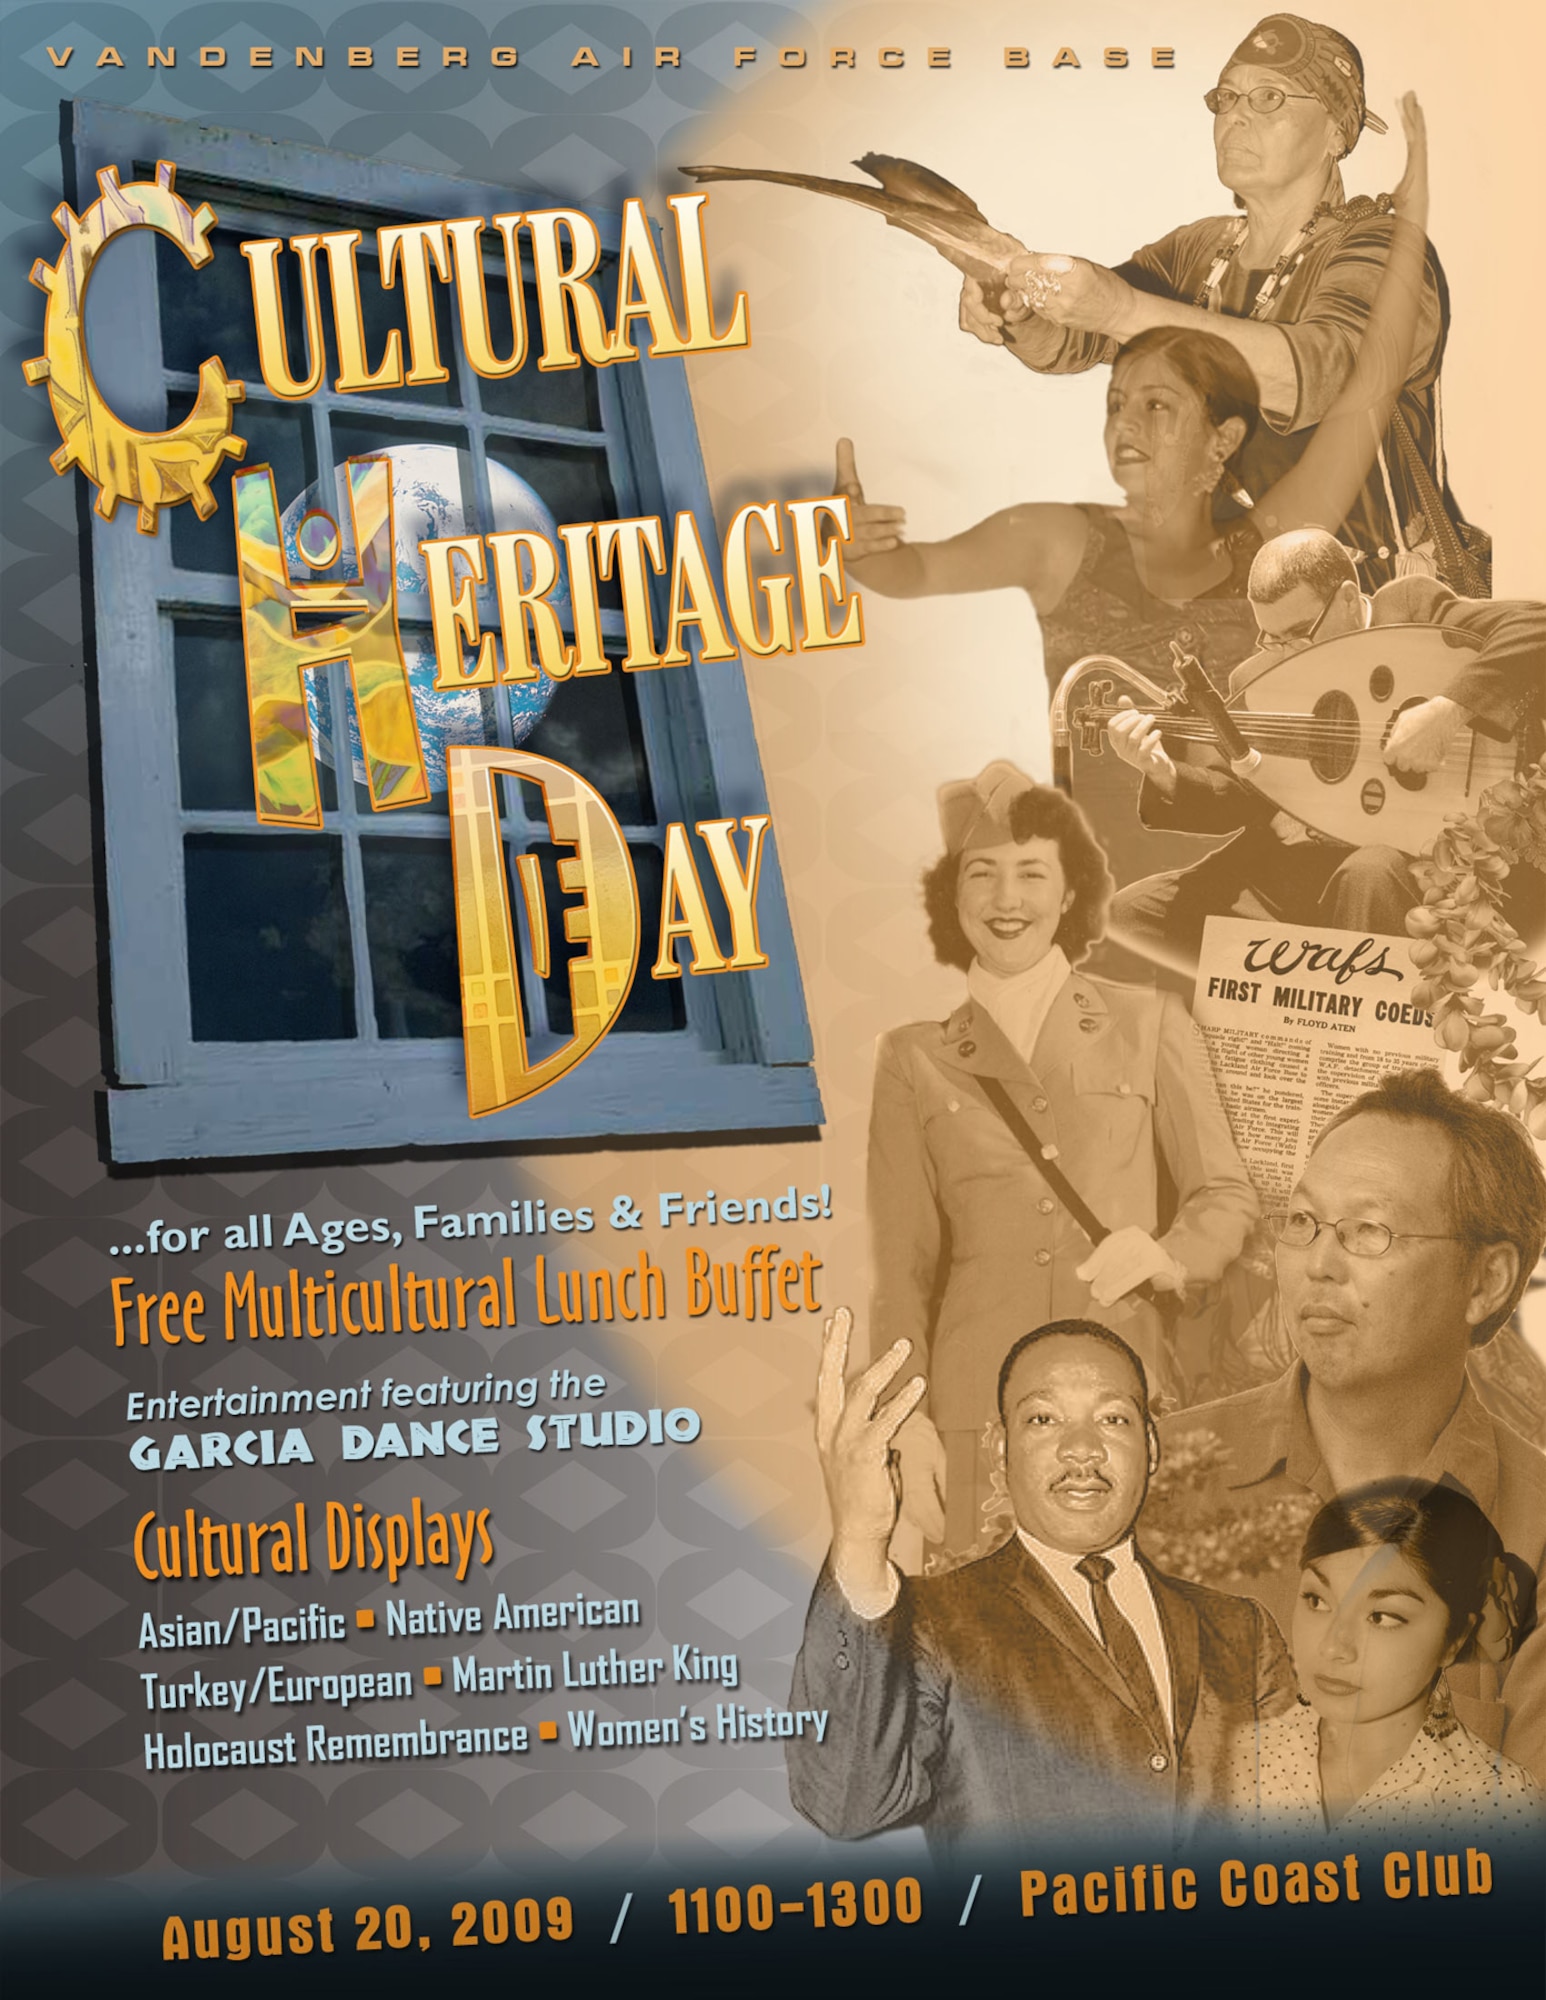 VANDENBERG AIR FORCE BASE, Calif. --  Vandenberg will celebrate Cultural Heritage Day from 11 a.m. to 1 p.m. Aug. 20 at the Pacific Coast Club here. (U.S. Air Force graphic)